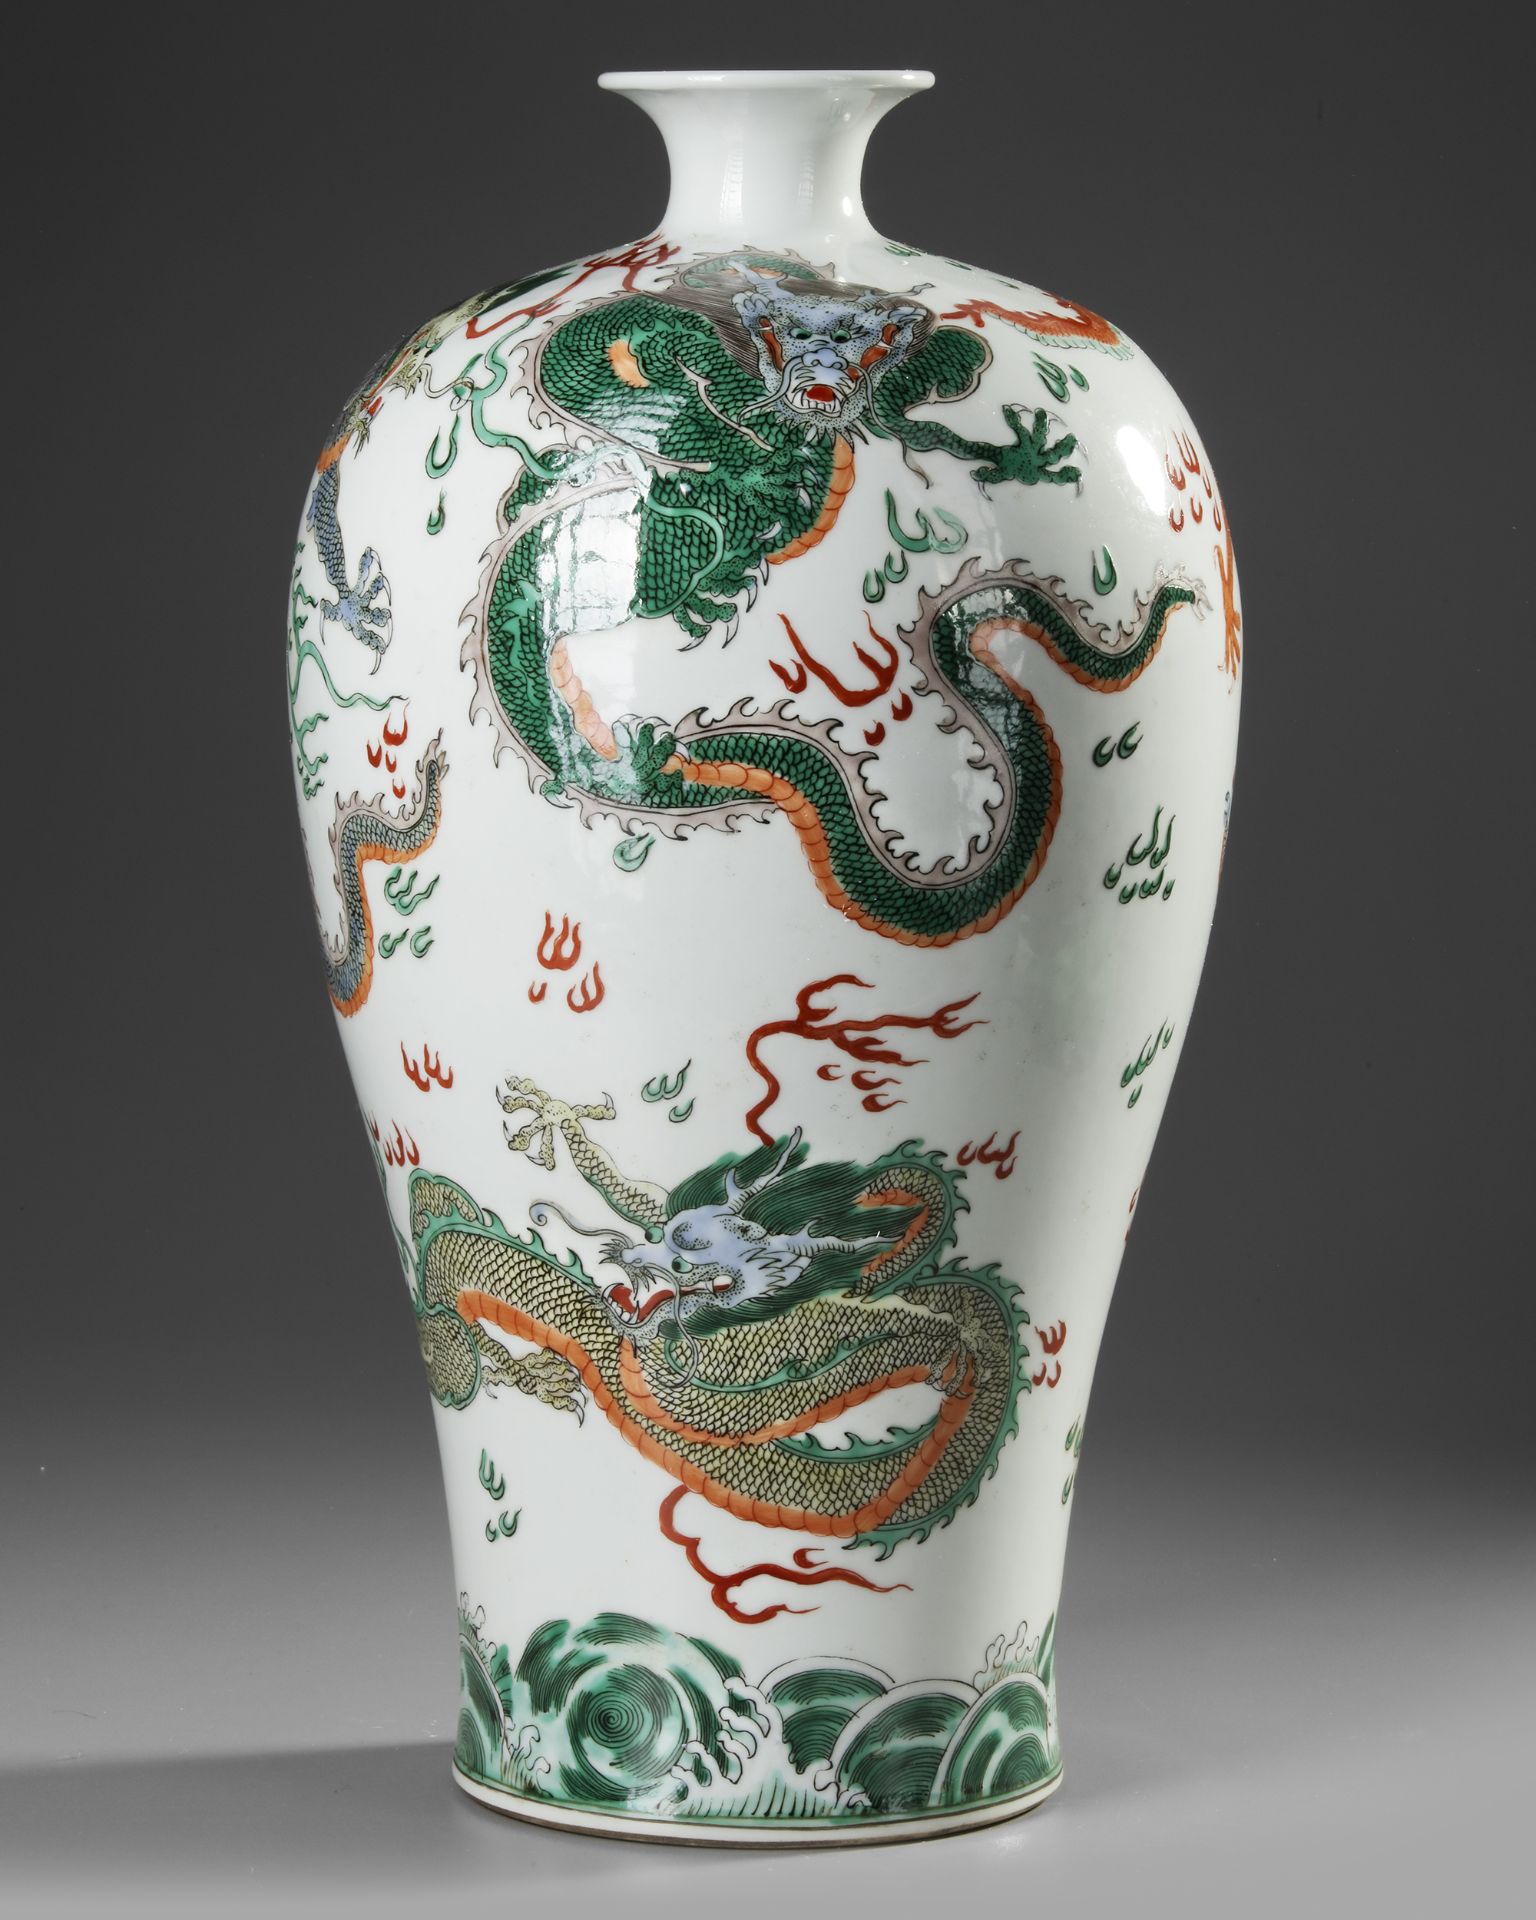 A LARGE CHINESE FAMILLE VERTE MEIPING VASE, 19TH-20TH CENTURY